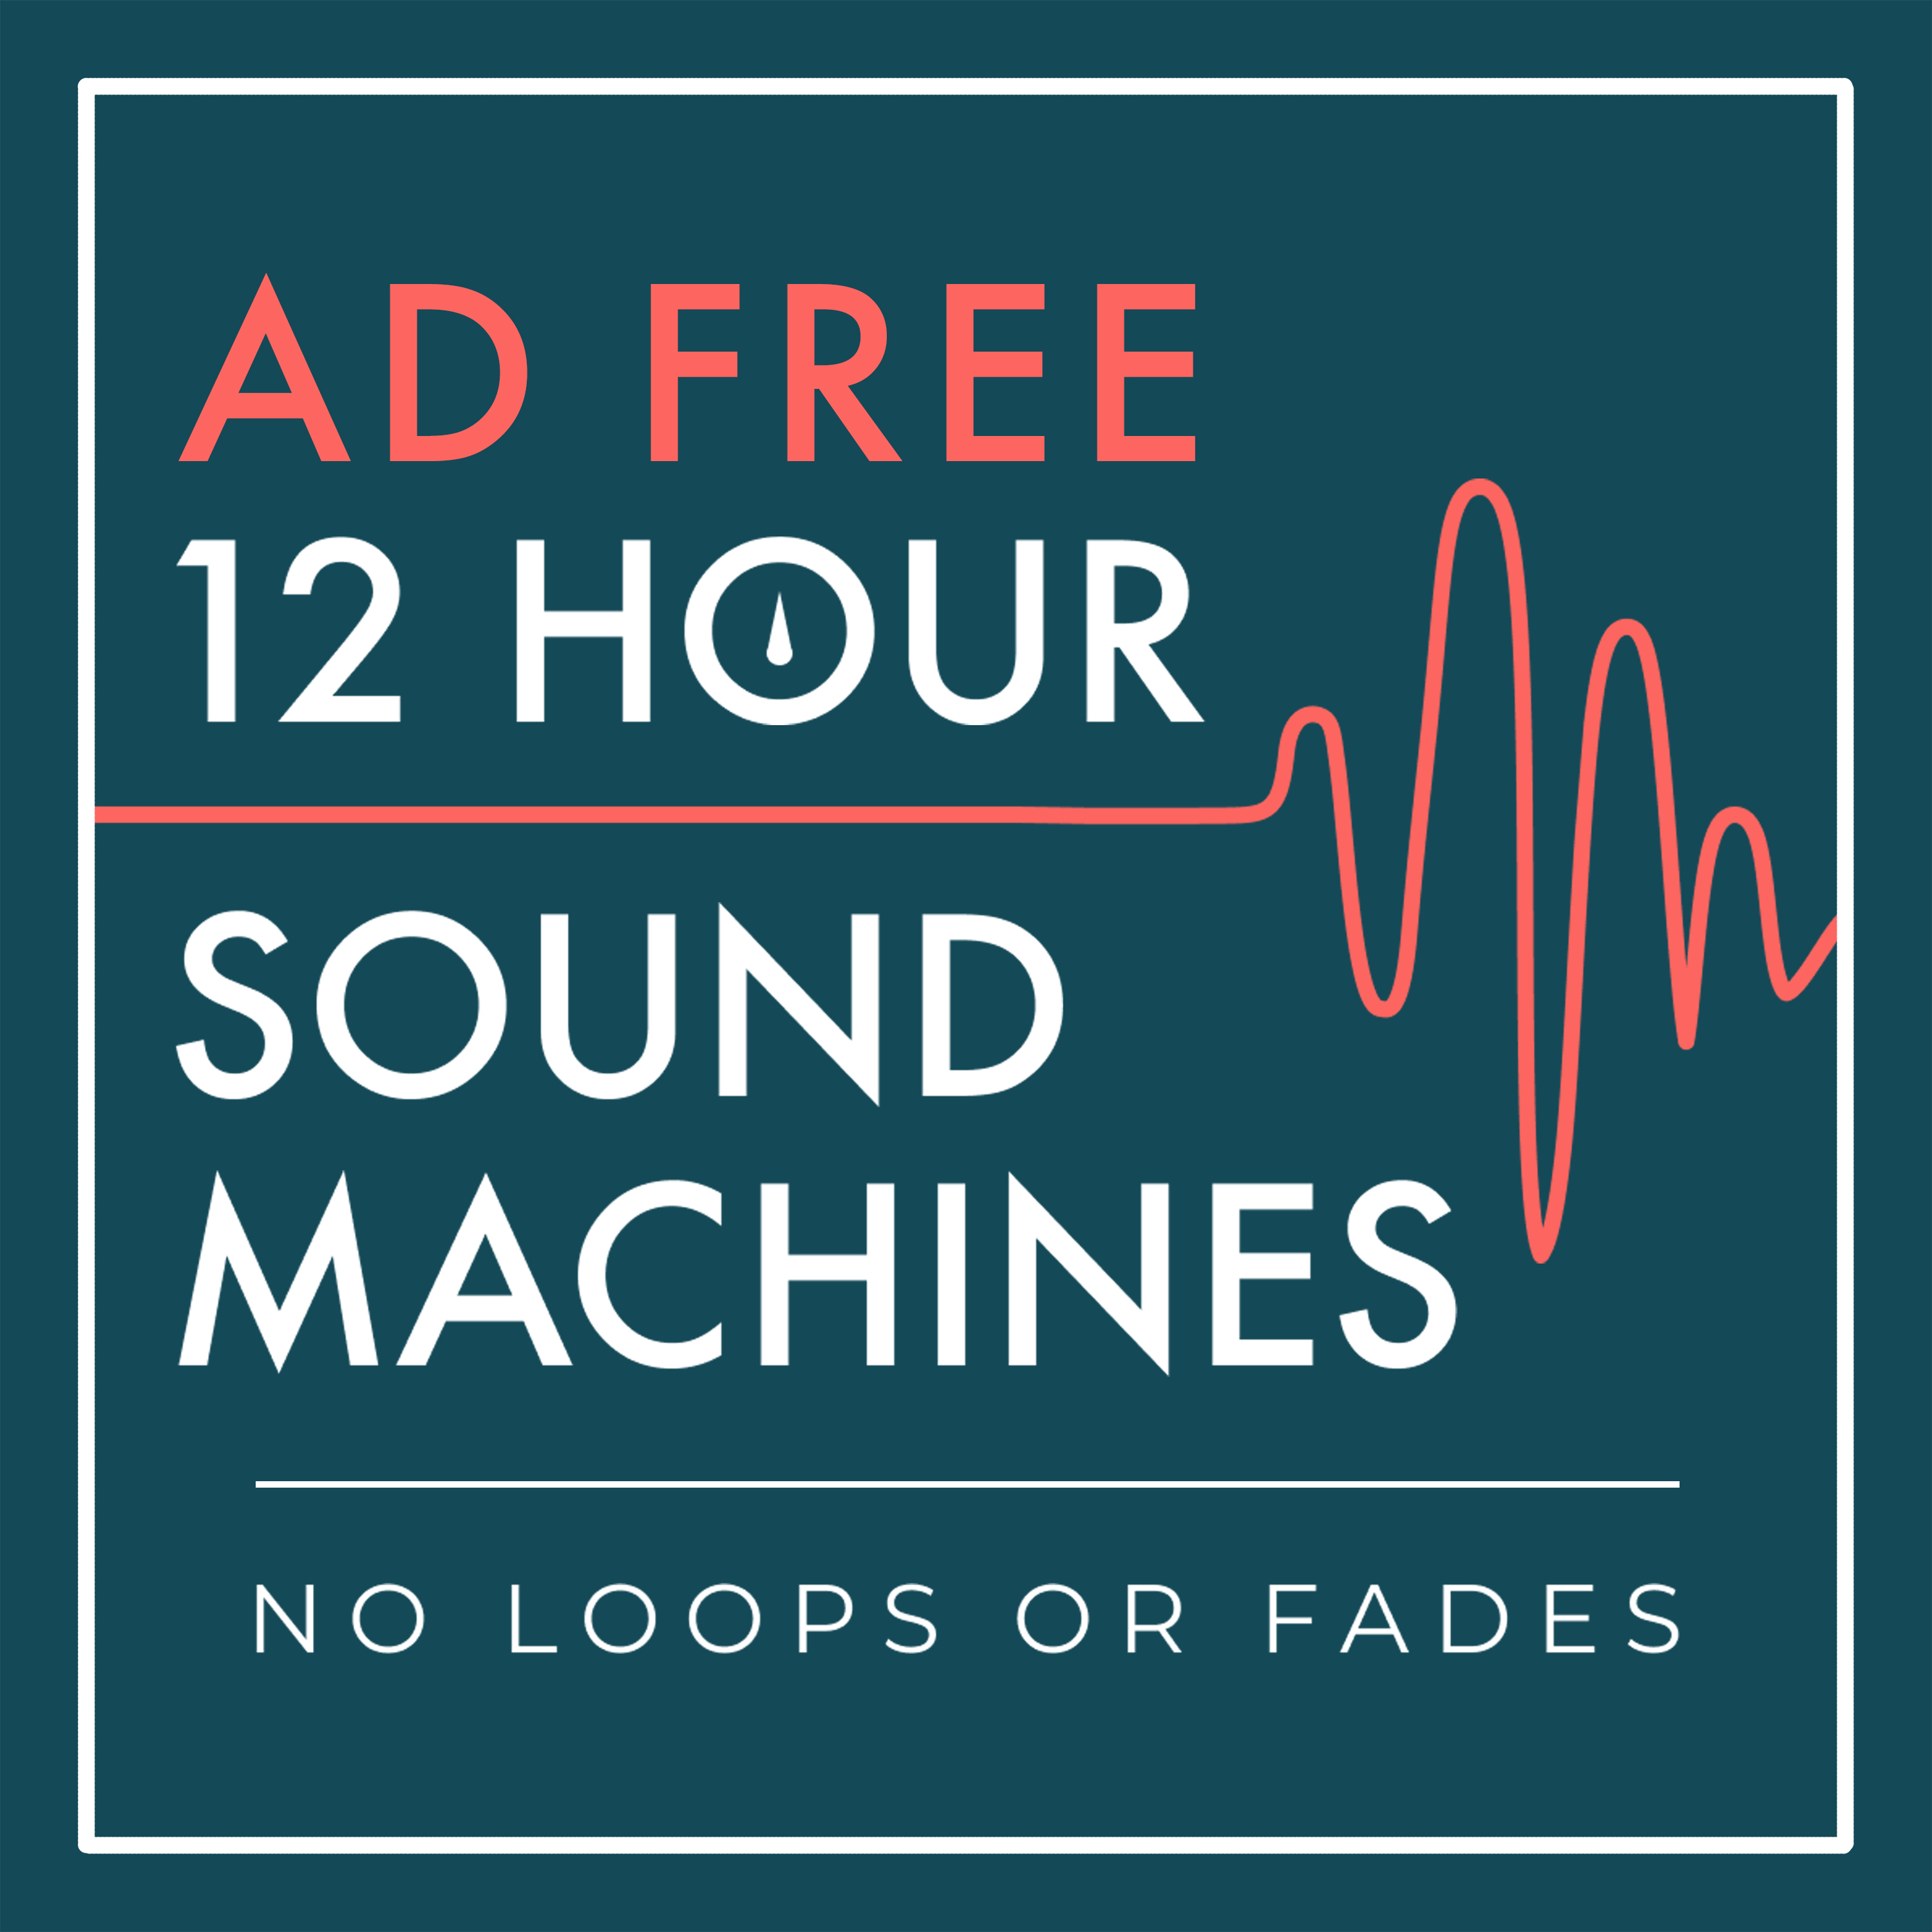 12 Hour Sound Machines (no loops or fades) logo